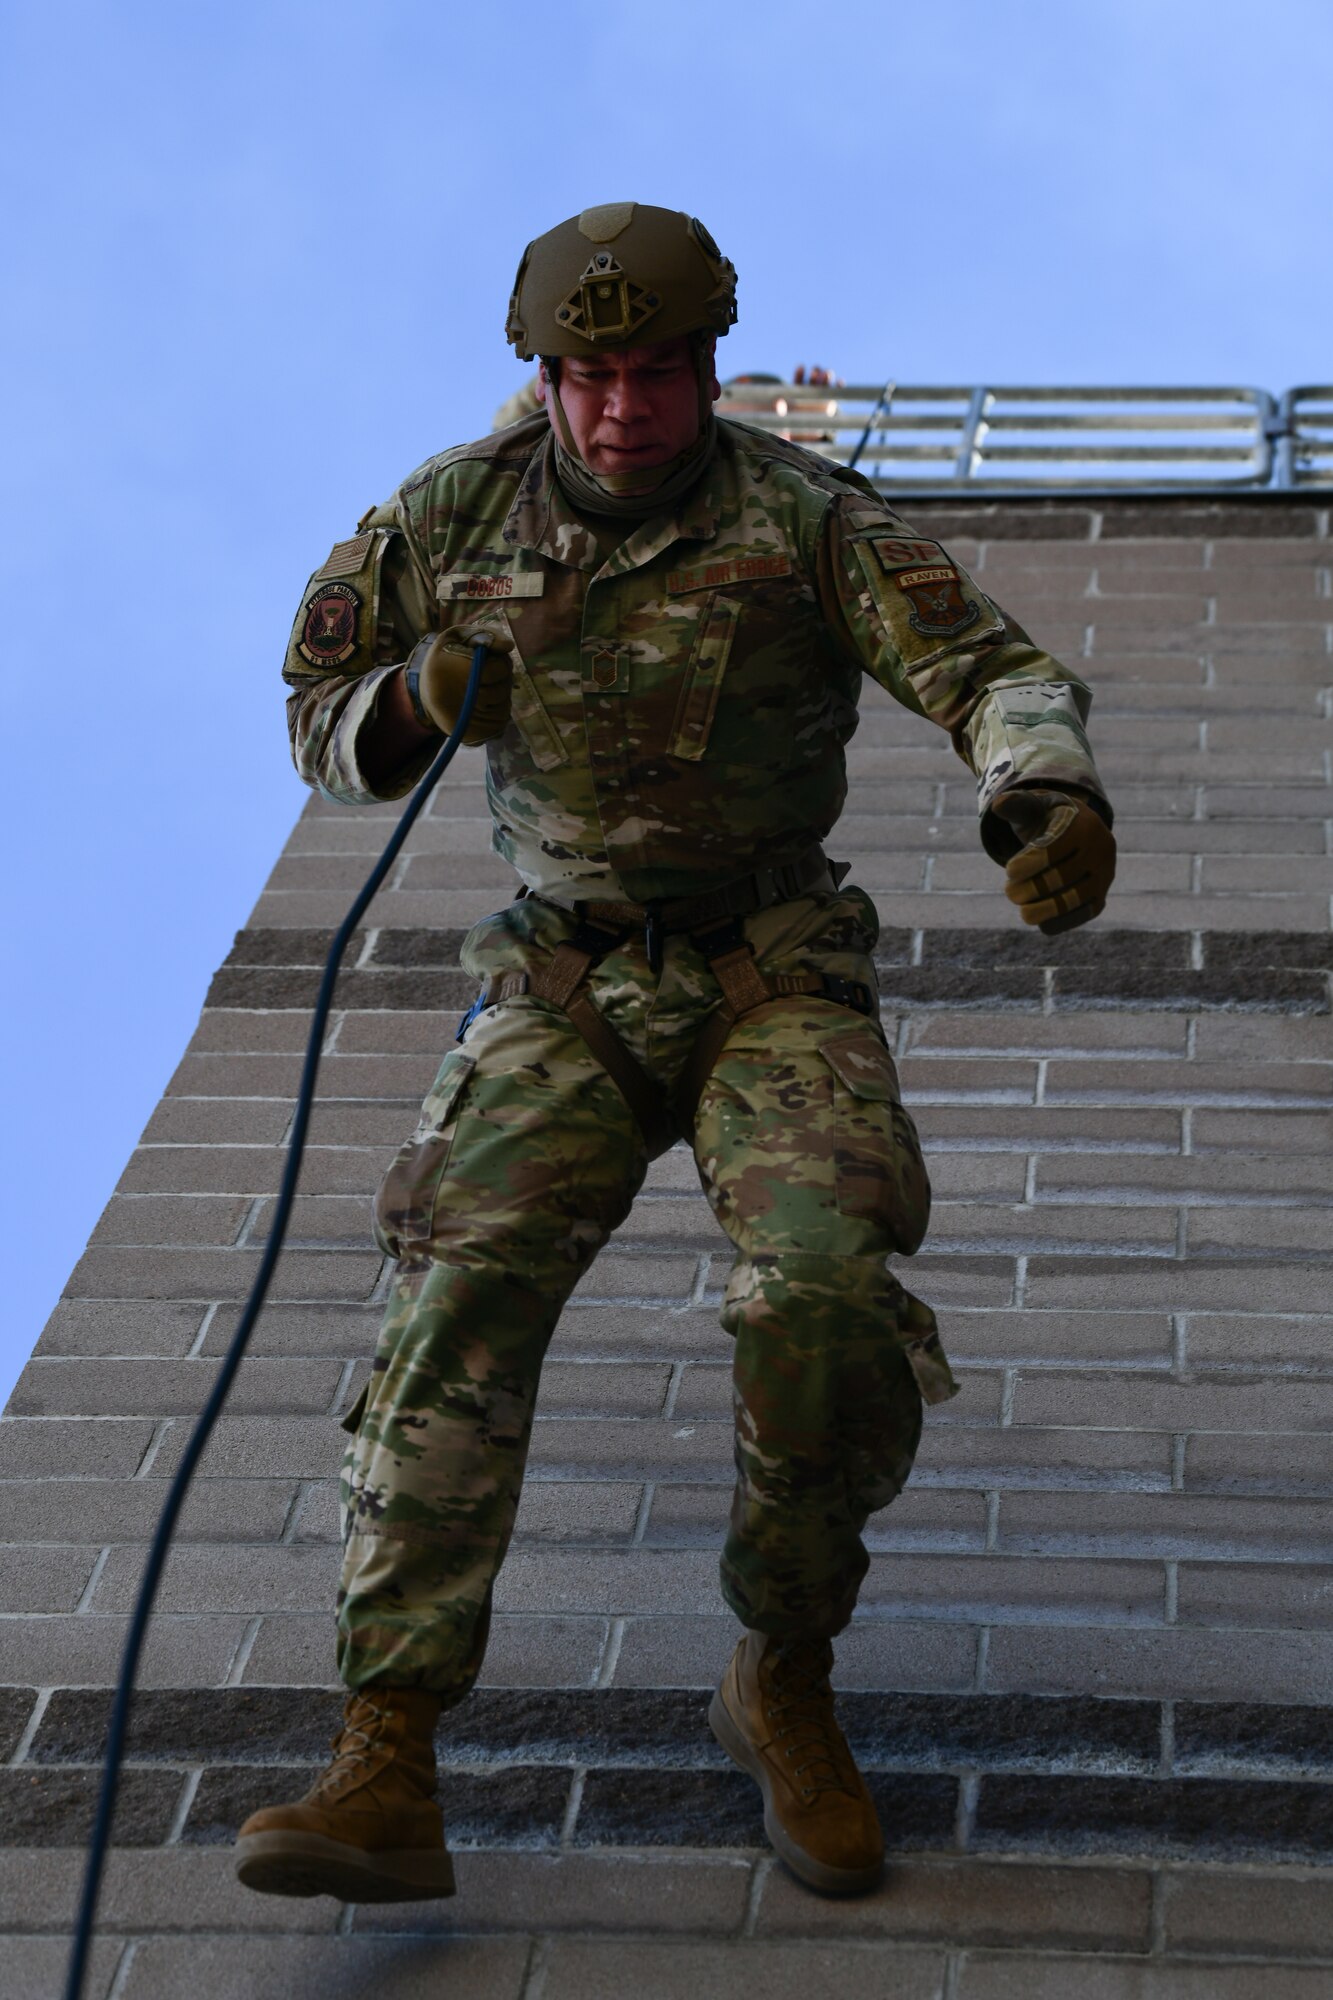 Aussie style rappelling